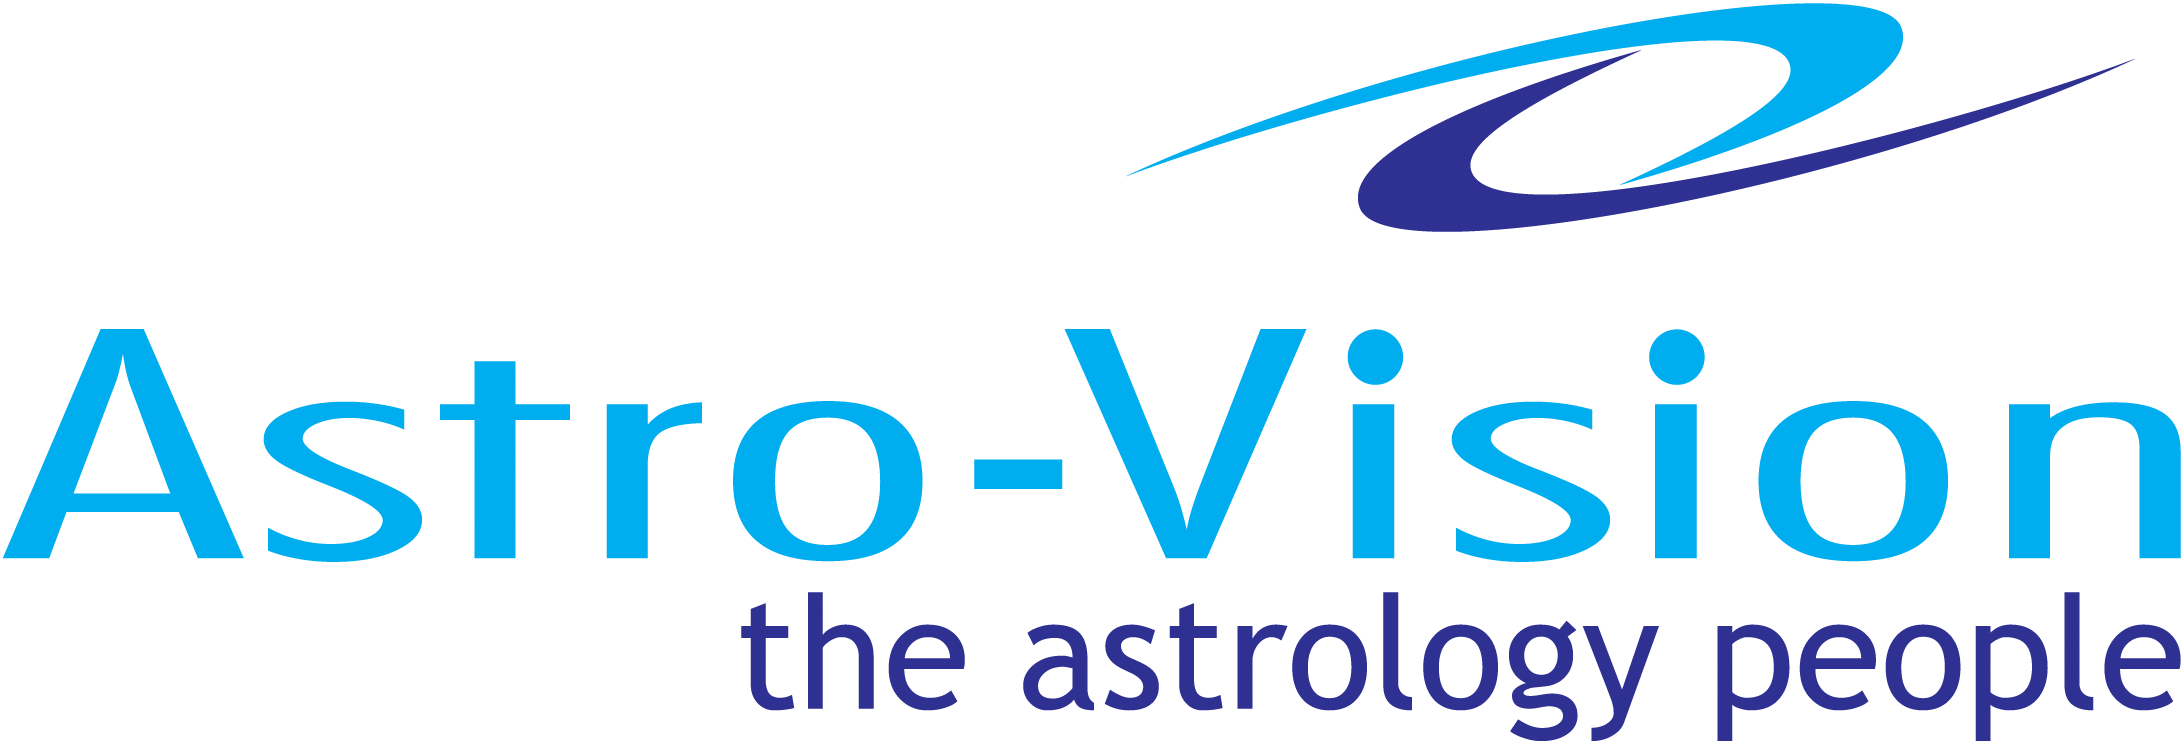 astrovisionlogo-final.png